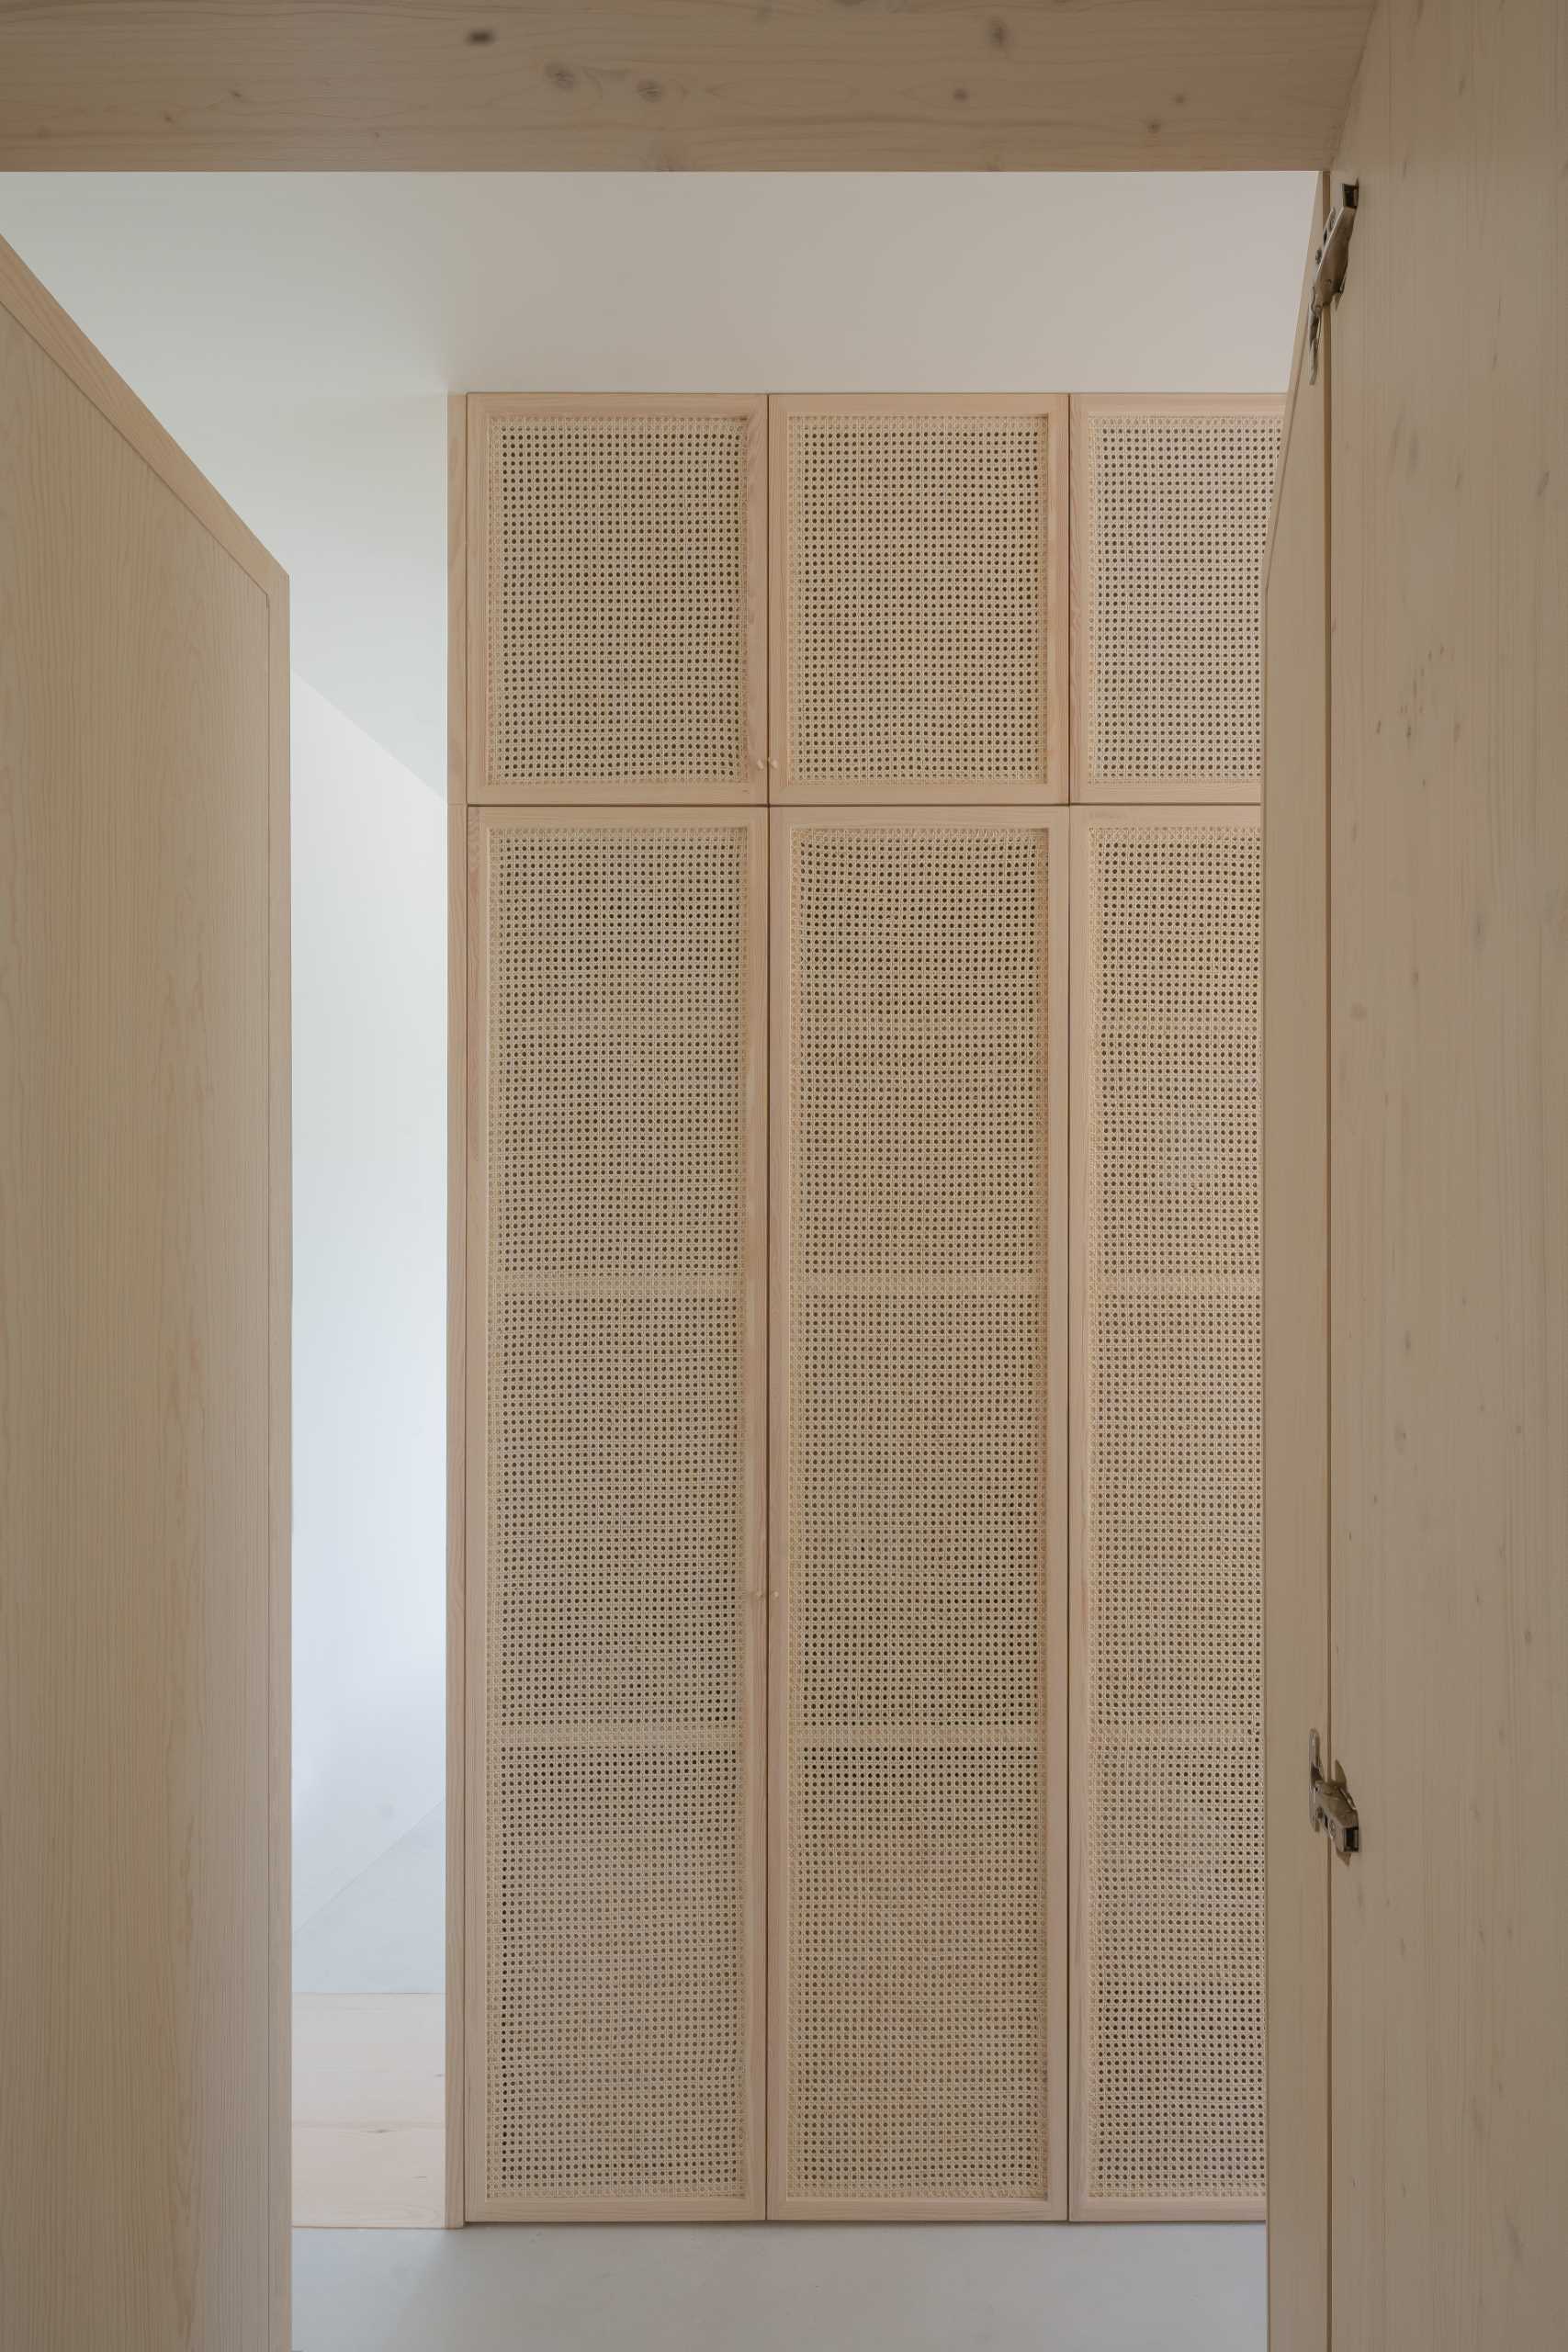 A walk-in closet with artisanal rattan and light pine wood carpentry.